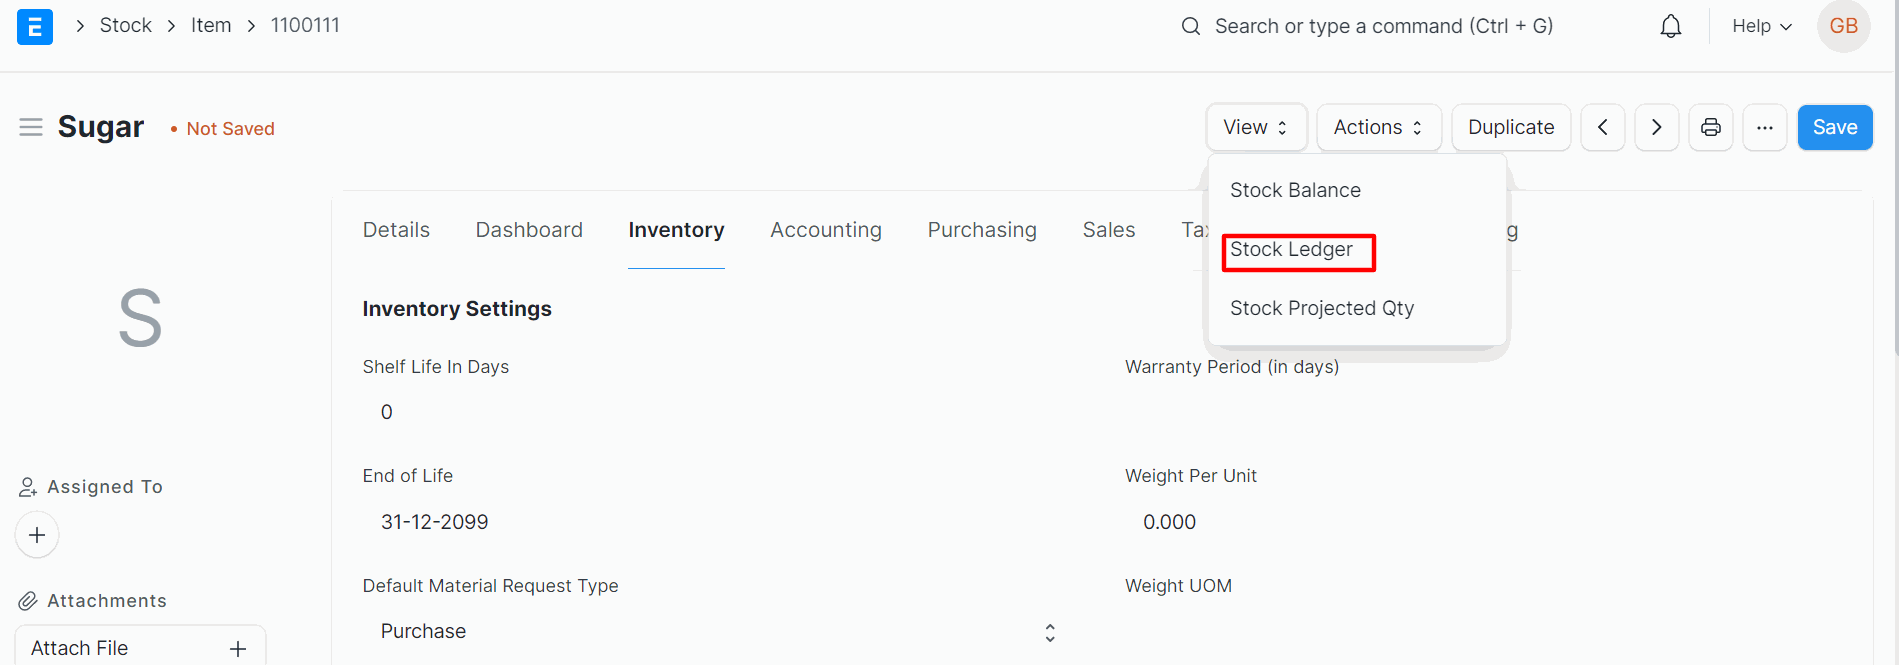 Go To stock ledger and see the difference between Sales and Purchase